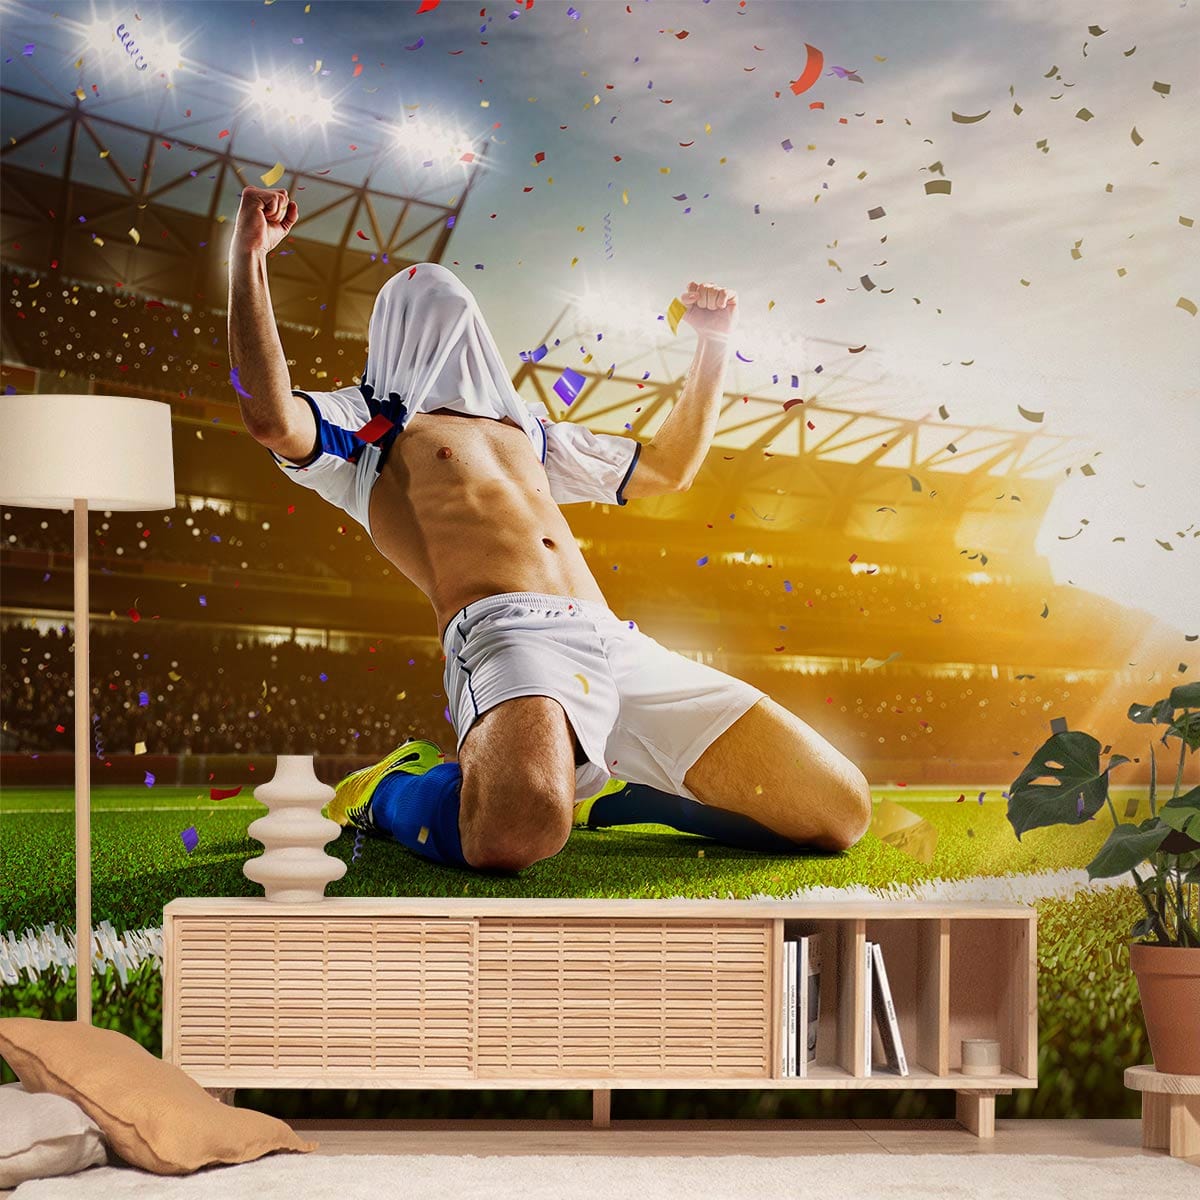 Wallpaper mural depicting soccer players celebrating a victory in the hallway